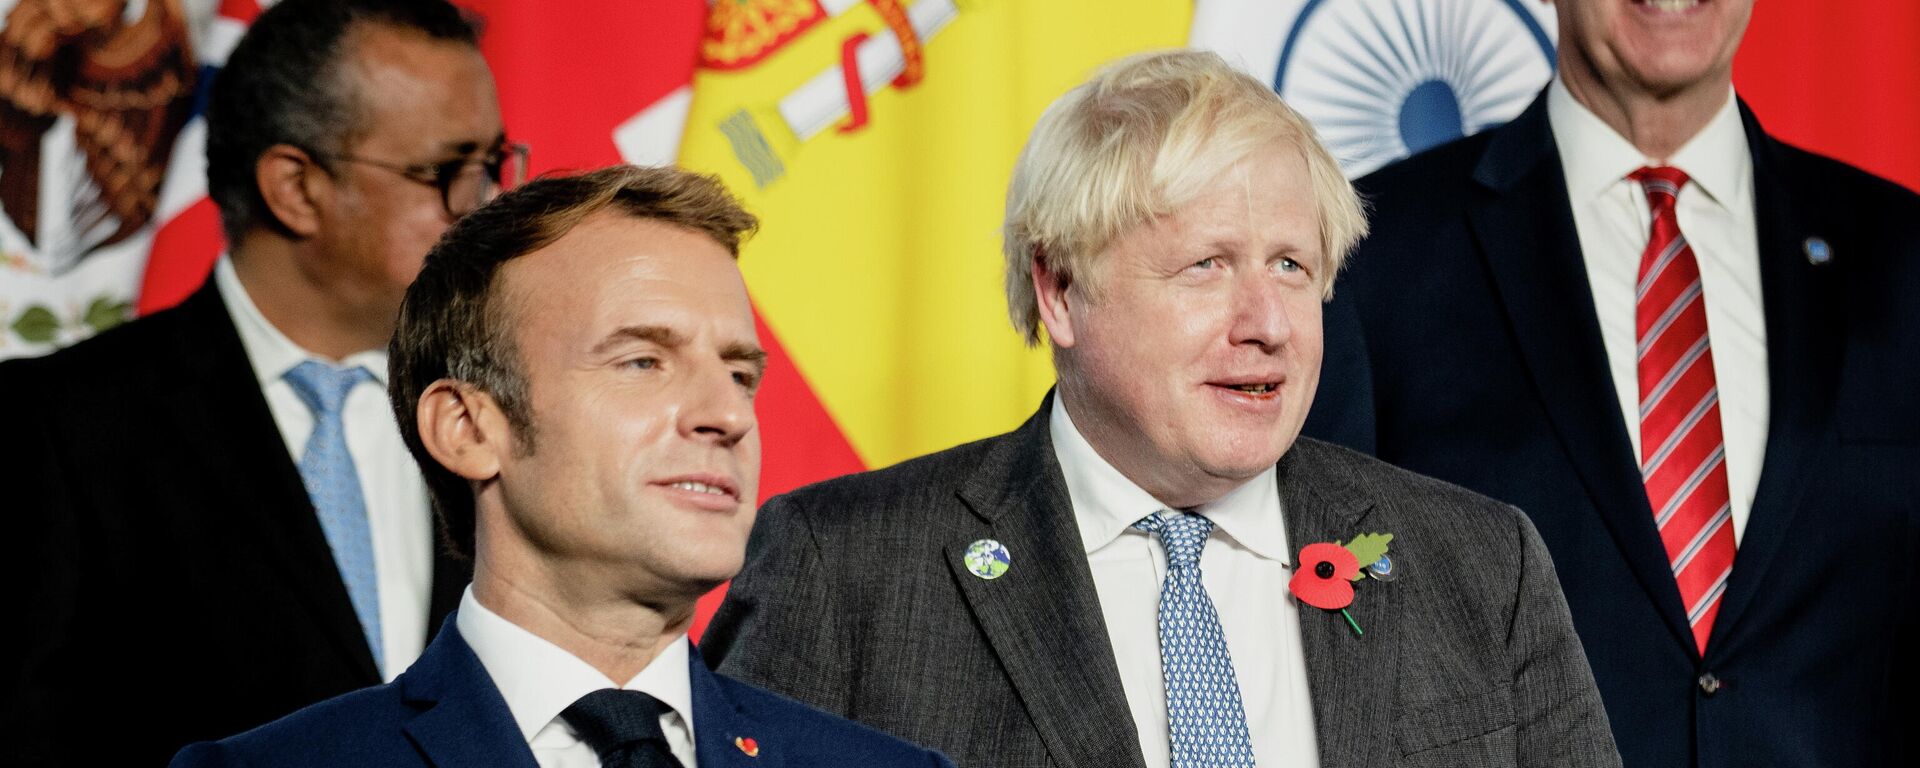 French President Emmanuel Macron and Britain's Prime Minister Boris Johnson attend a family photo session during the G20 summit at the La Nuvola in Rome, Italy October 30, 2021. - Sputnik International, 1920, 30.10.2021